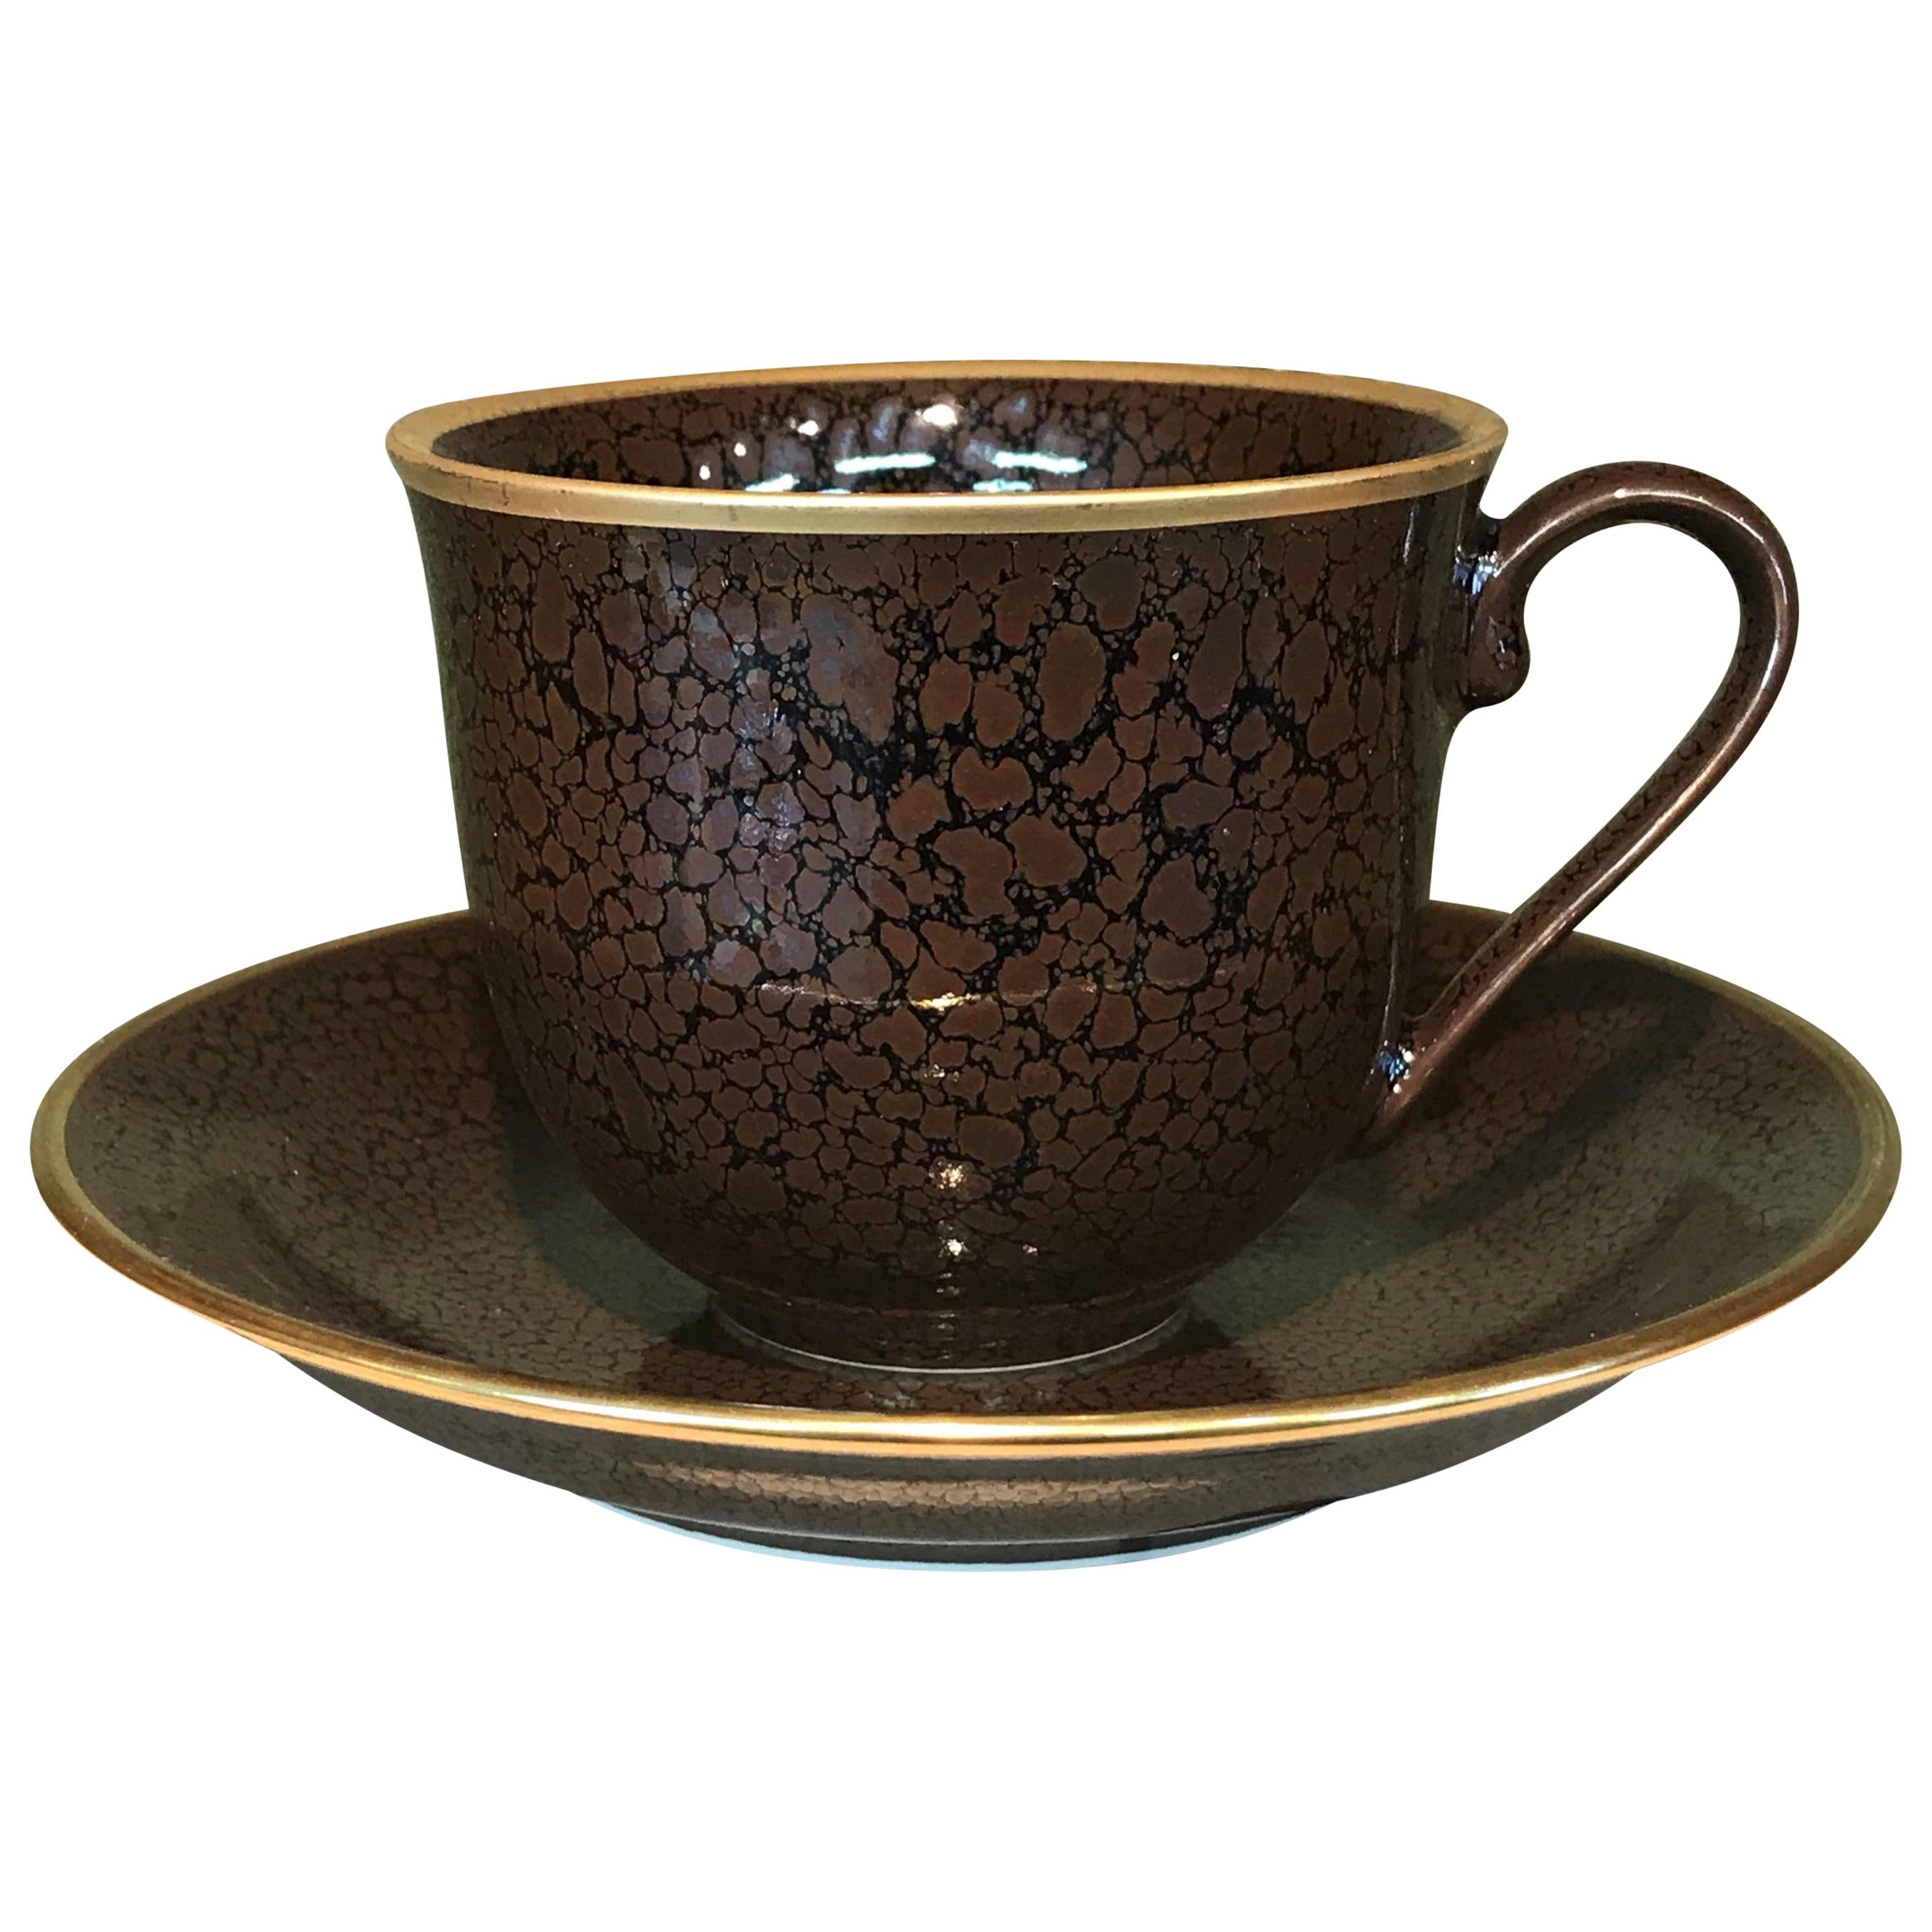 Japanese Gilded Hand-Glazed Brown Porcelain Cup and Saucer by Master Artist